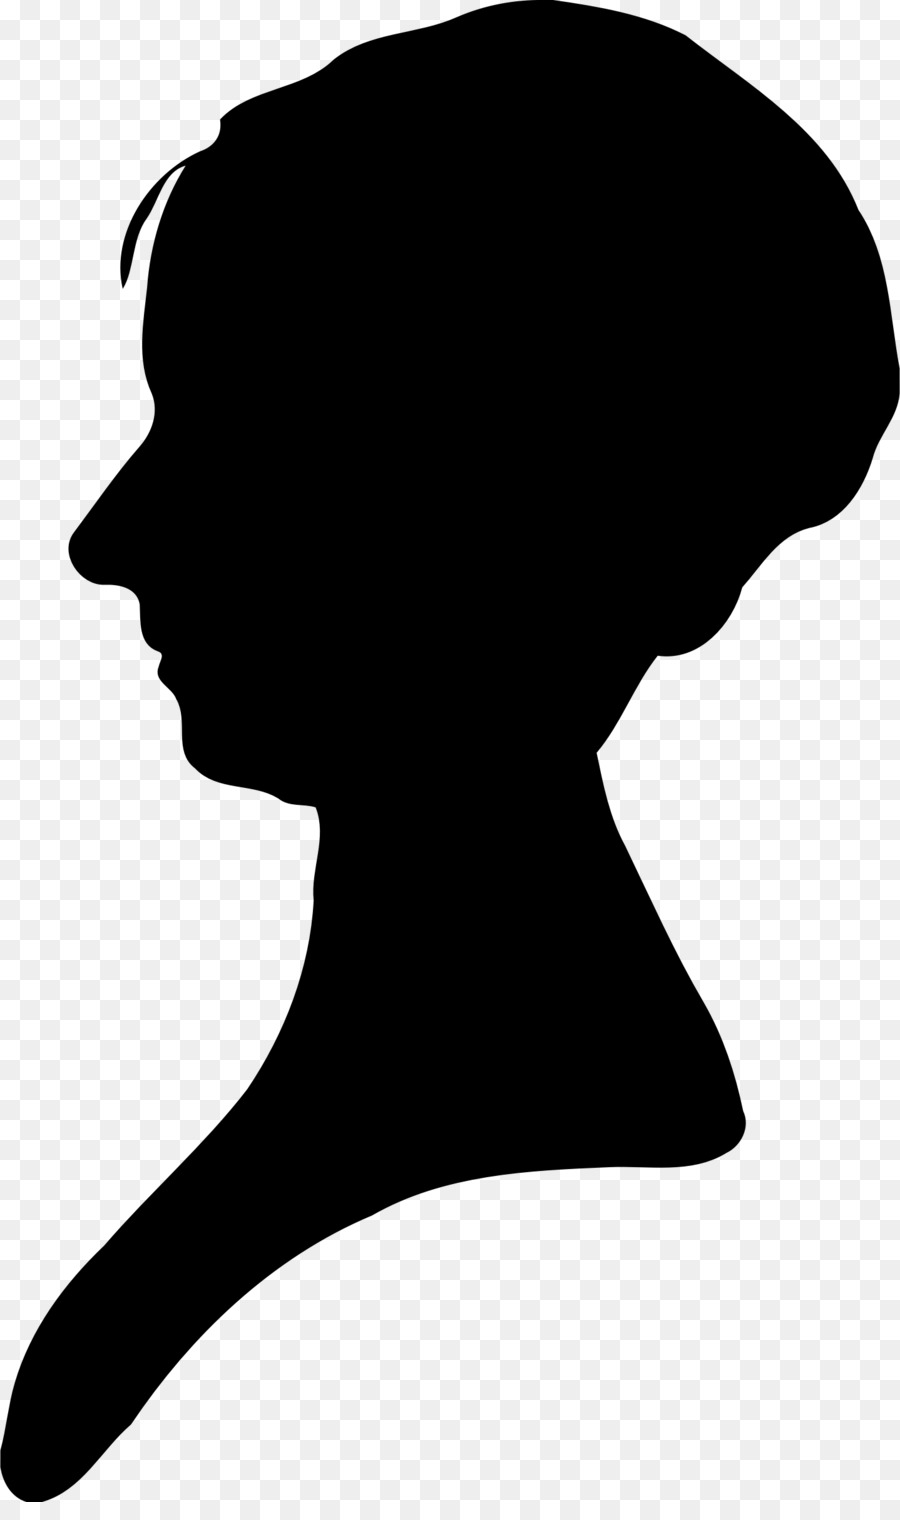 Silhouette Photography Clip art - Woman'.s Day png download - 1438*2400 - Free Transparent Silhouette png Download.